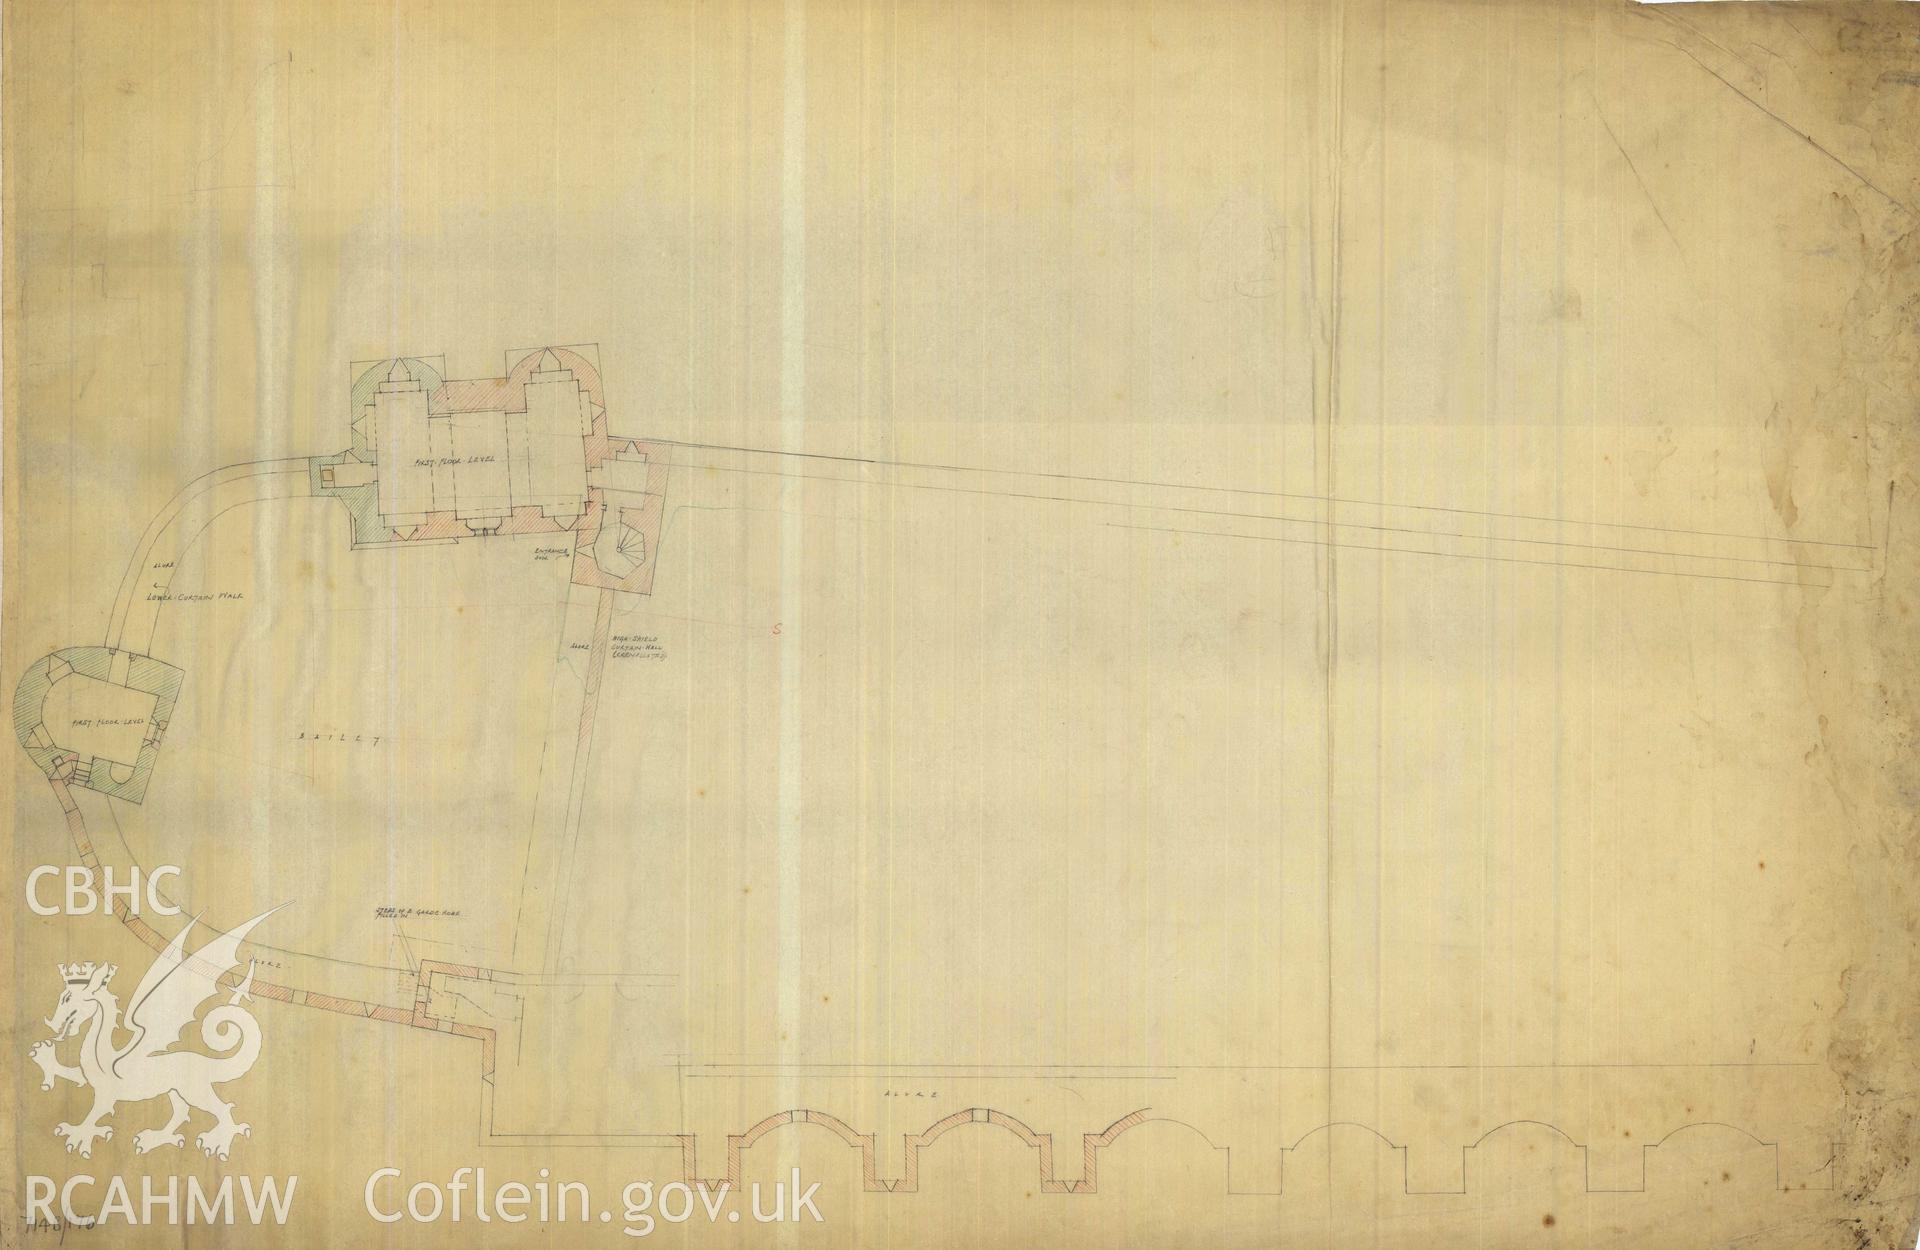 Cadw guardianship monument drawing of Caerphilly Castle. Dam, S part, general plan, up. floor. Cadw Ref. No:714B/176. Scale 1:96.